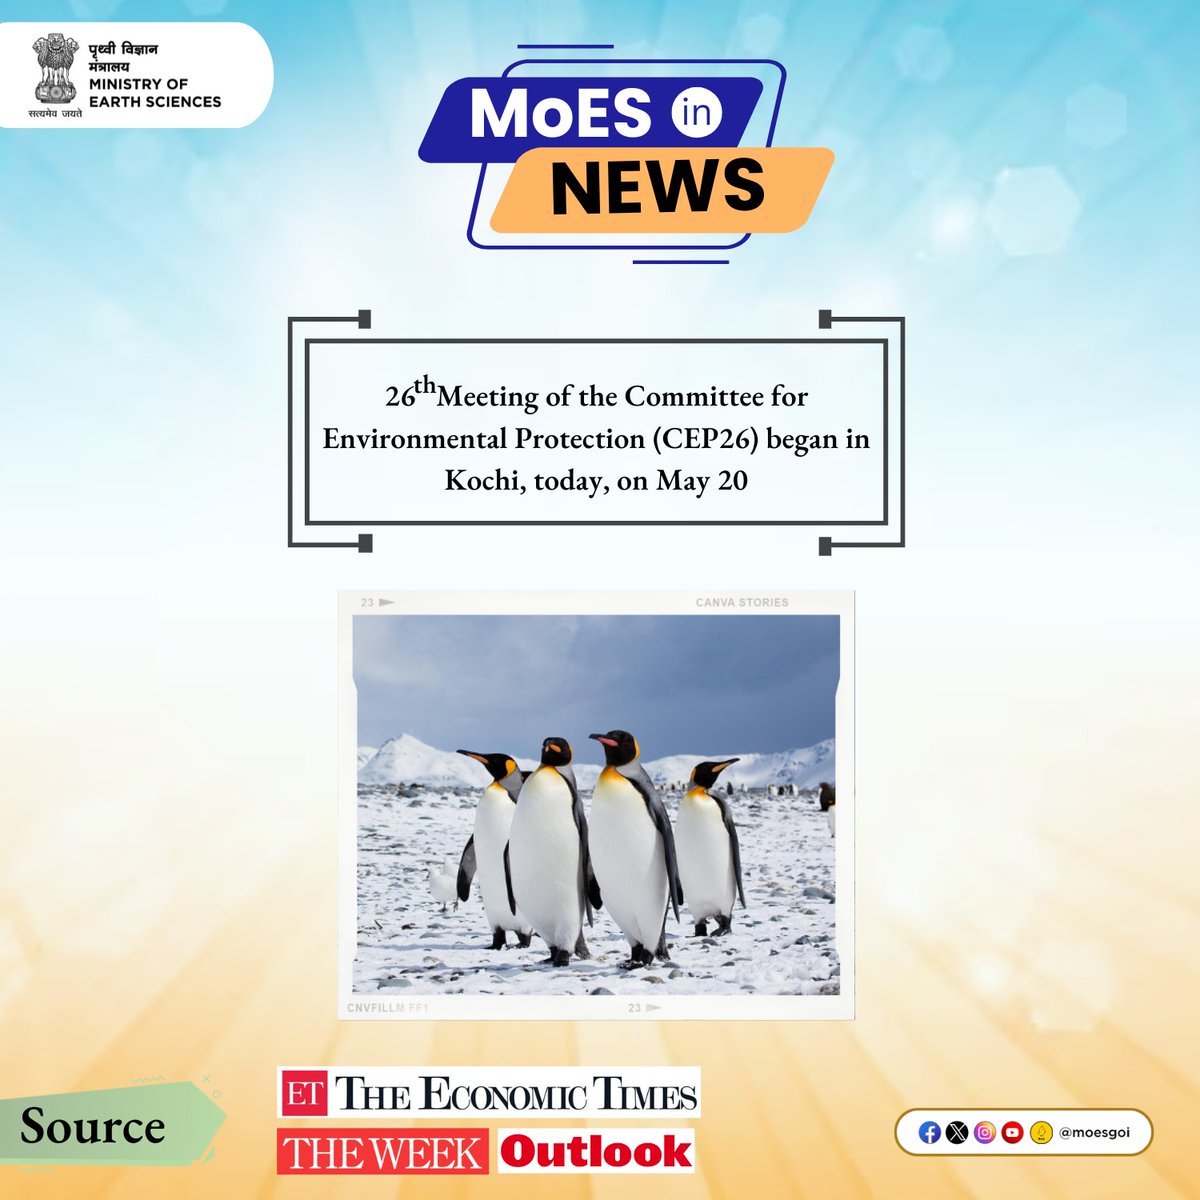 #MoESinNews
26th Meeting of the Committee for Environmental Protection (CEP26) began in Kochi, today, on May 20, hosted by India through @ncaor_goa under @moesgoi. 
#AntarcticExploration #ResearchFrontiers